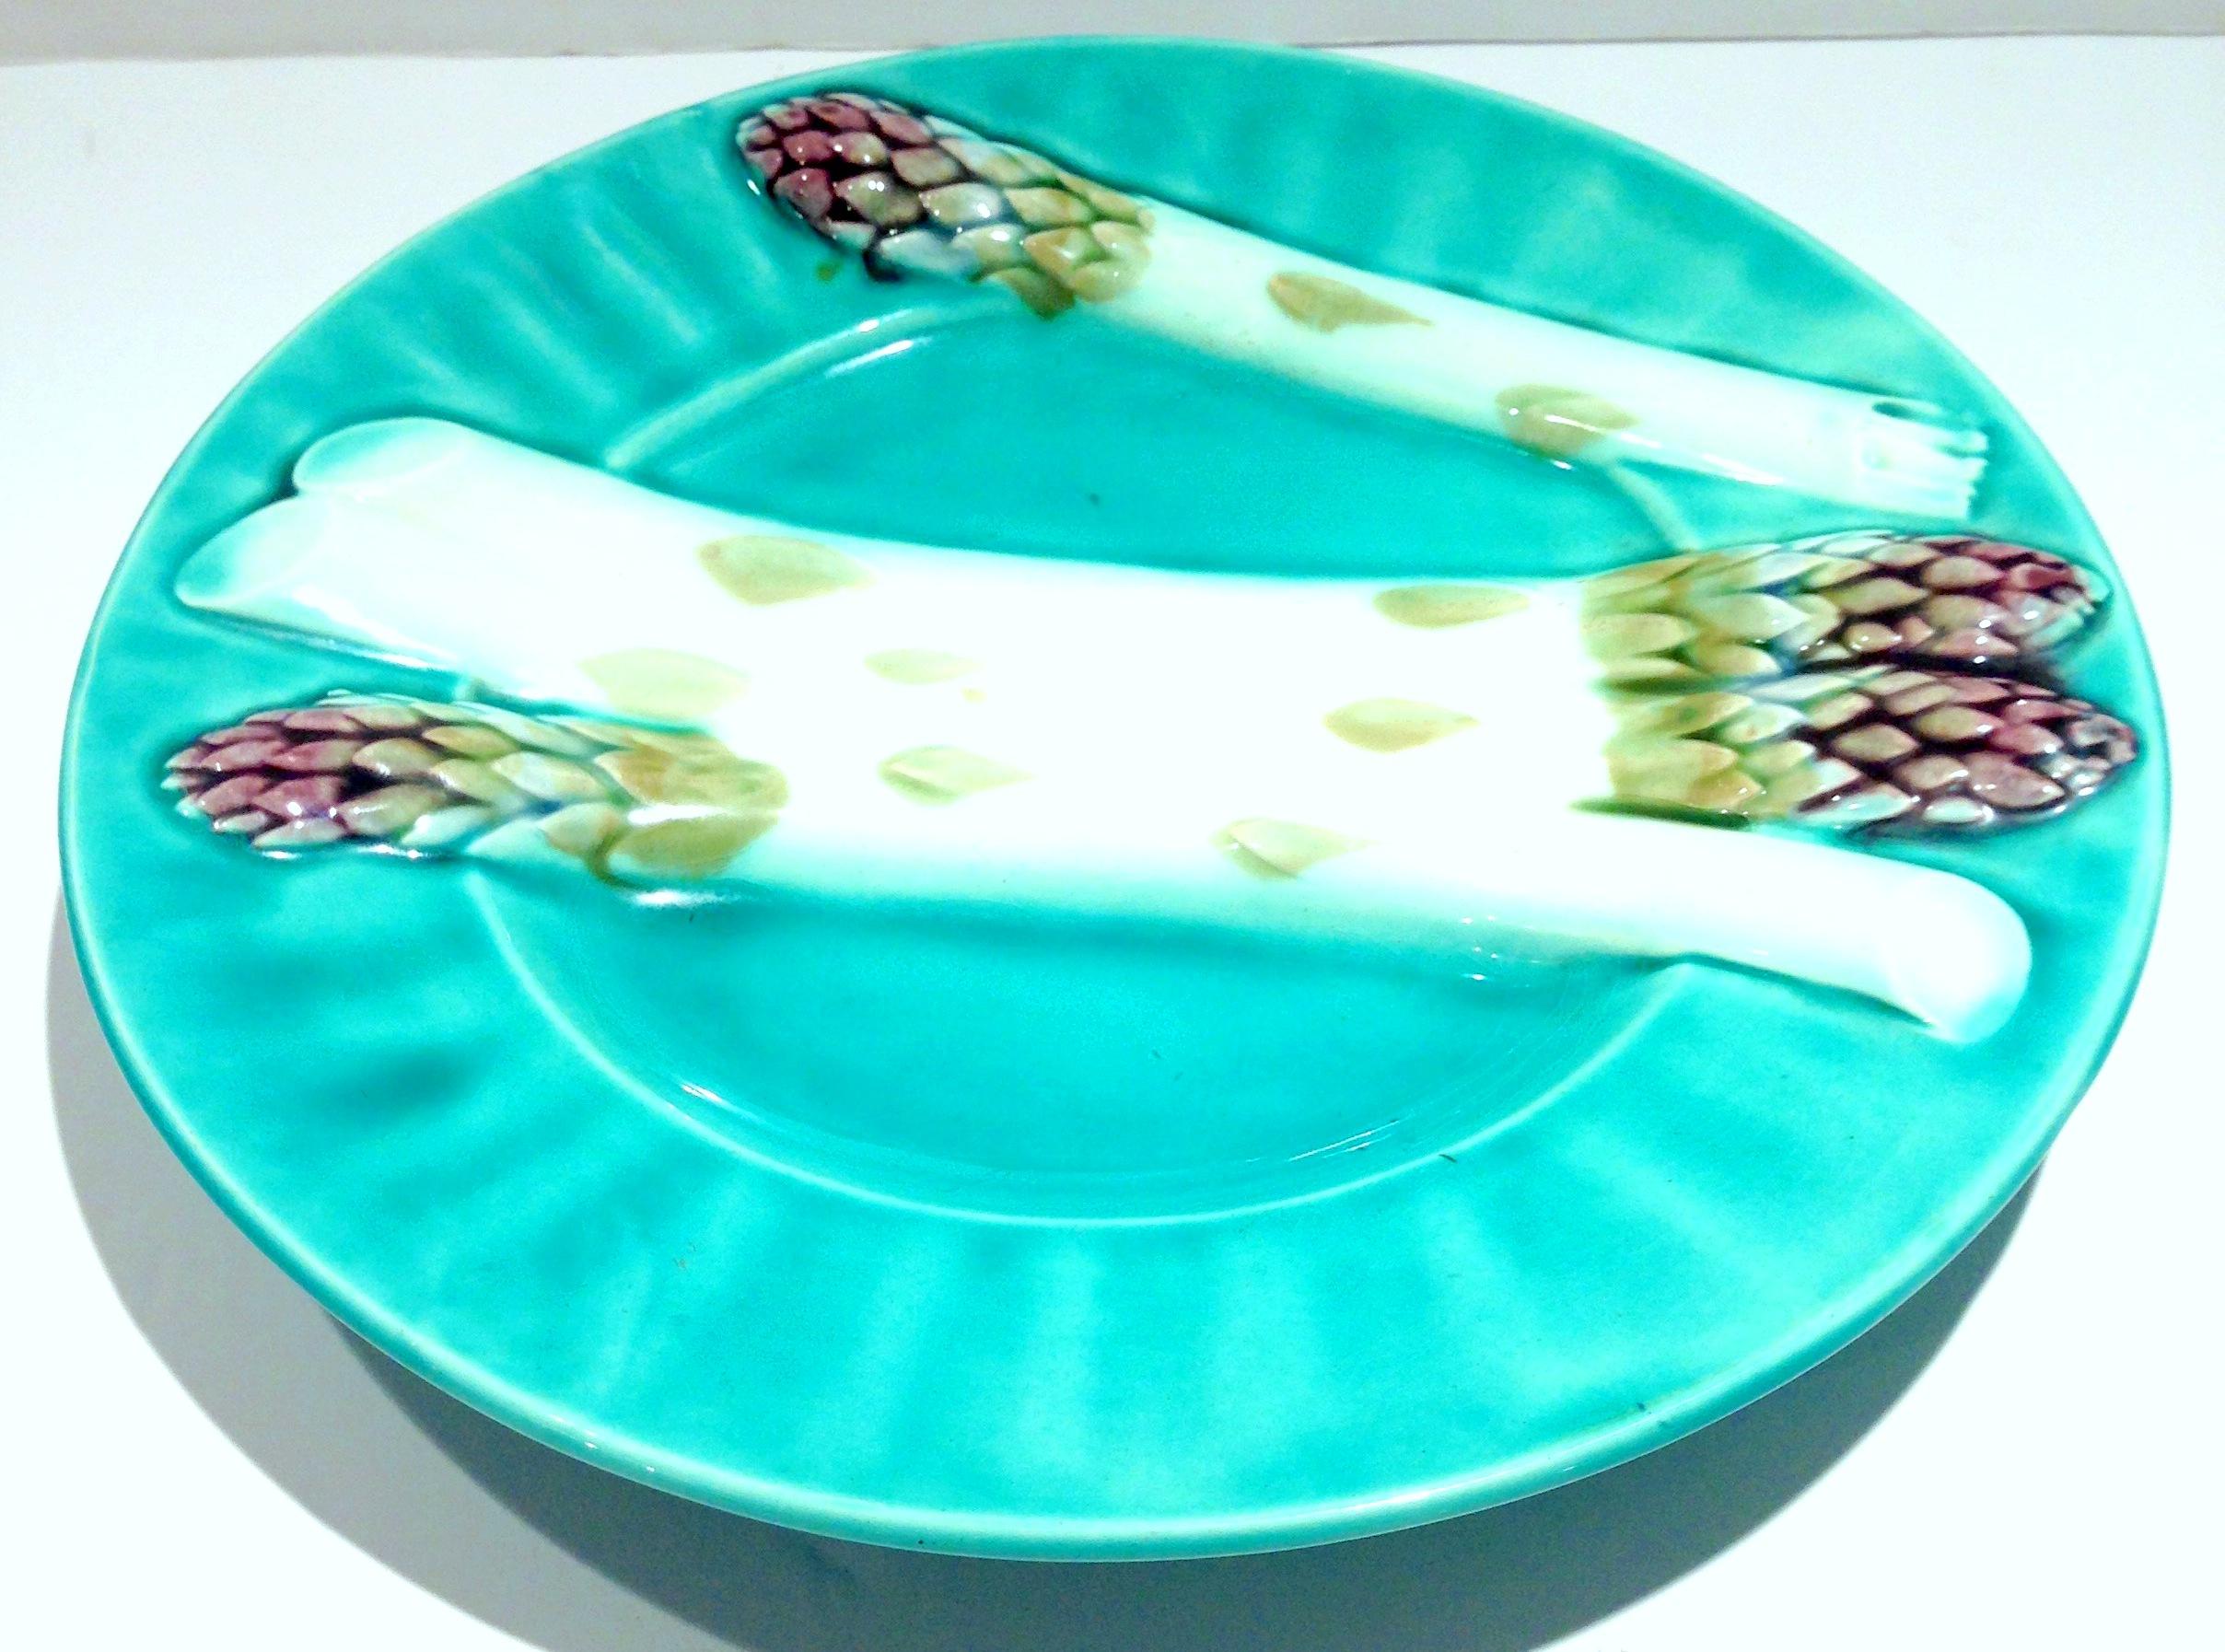 Early 1900'S Turquoise French Majolica asparagus plate with white, green and purple asparagus relief design. Signed on the underside, Depose K et G Lunville.